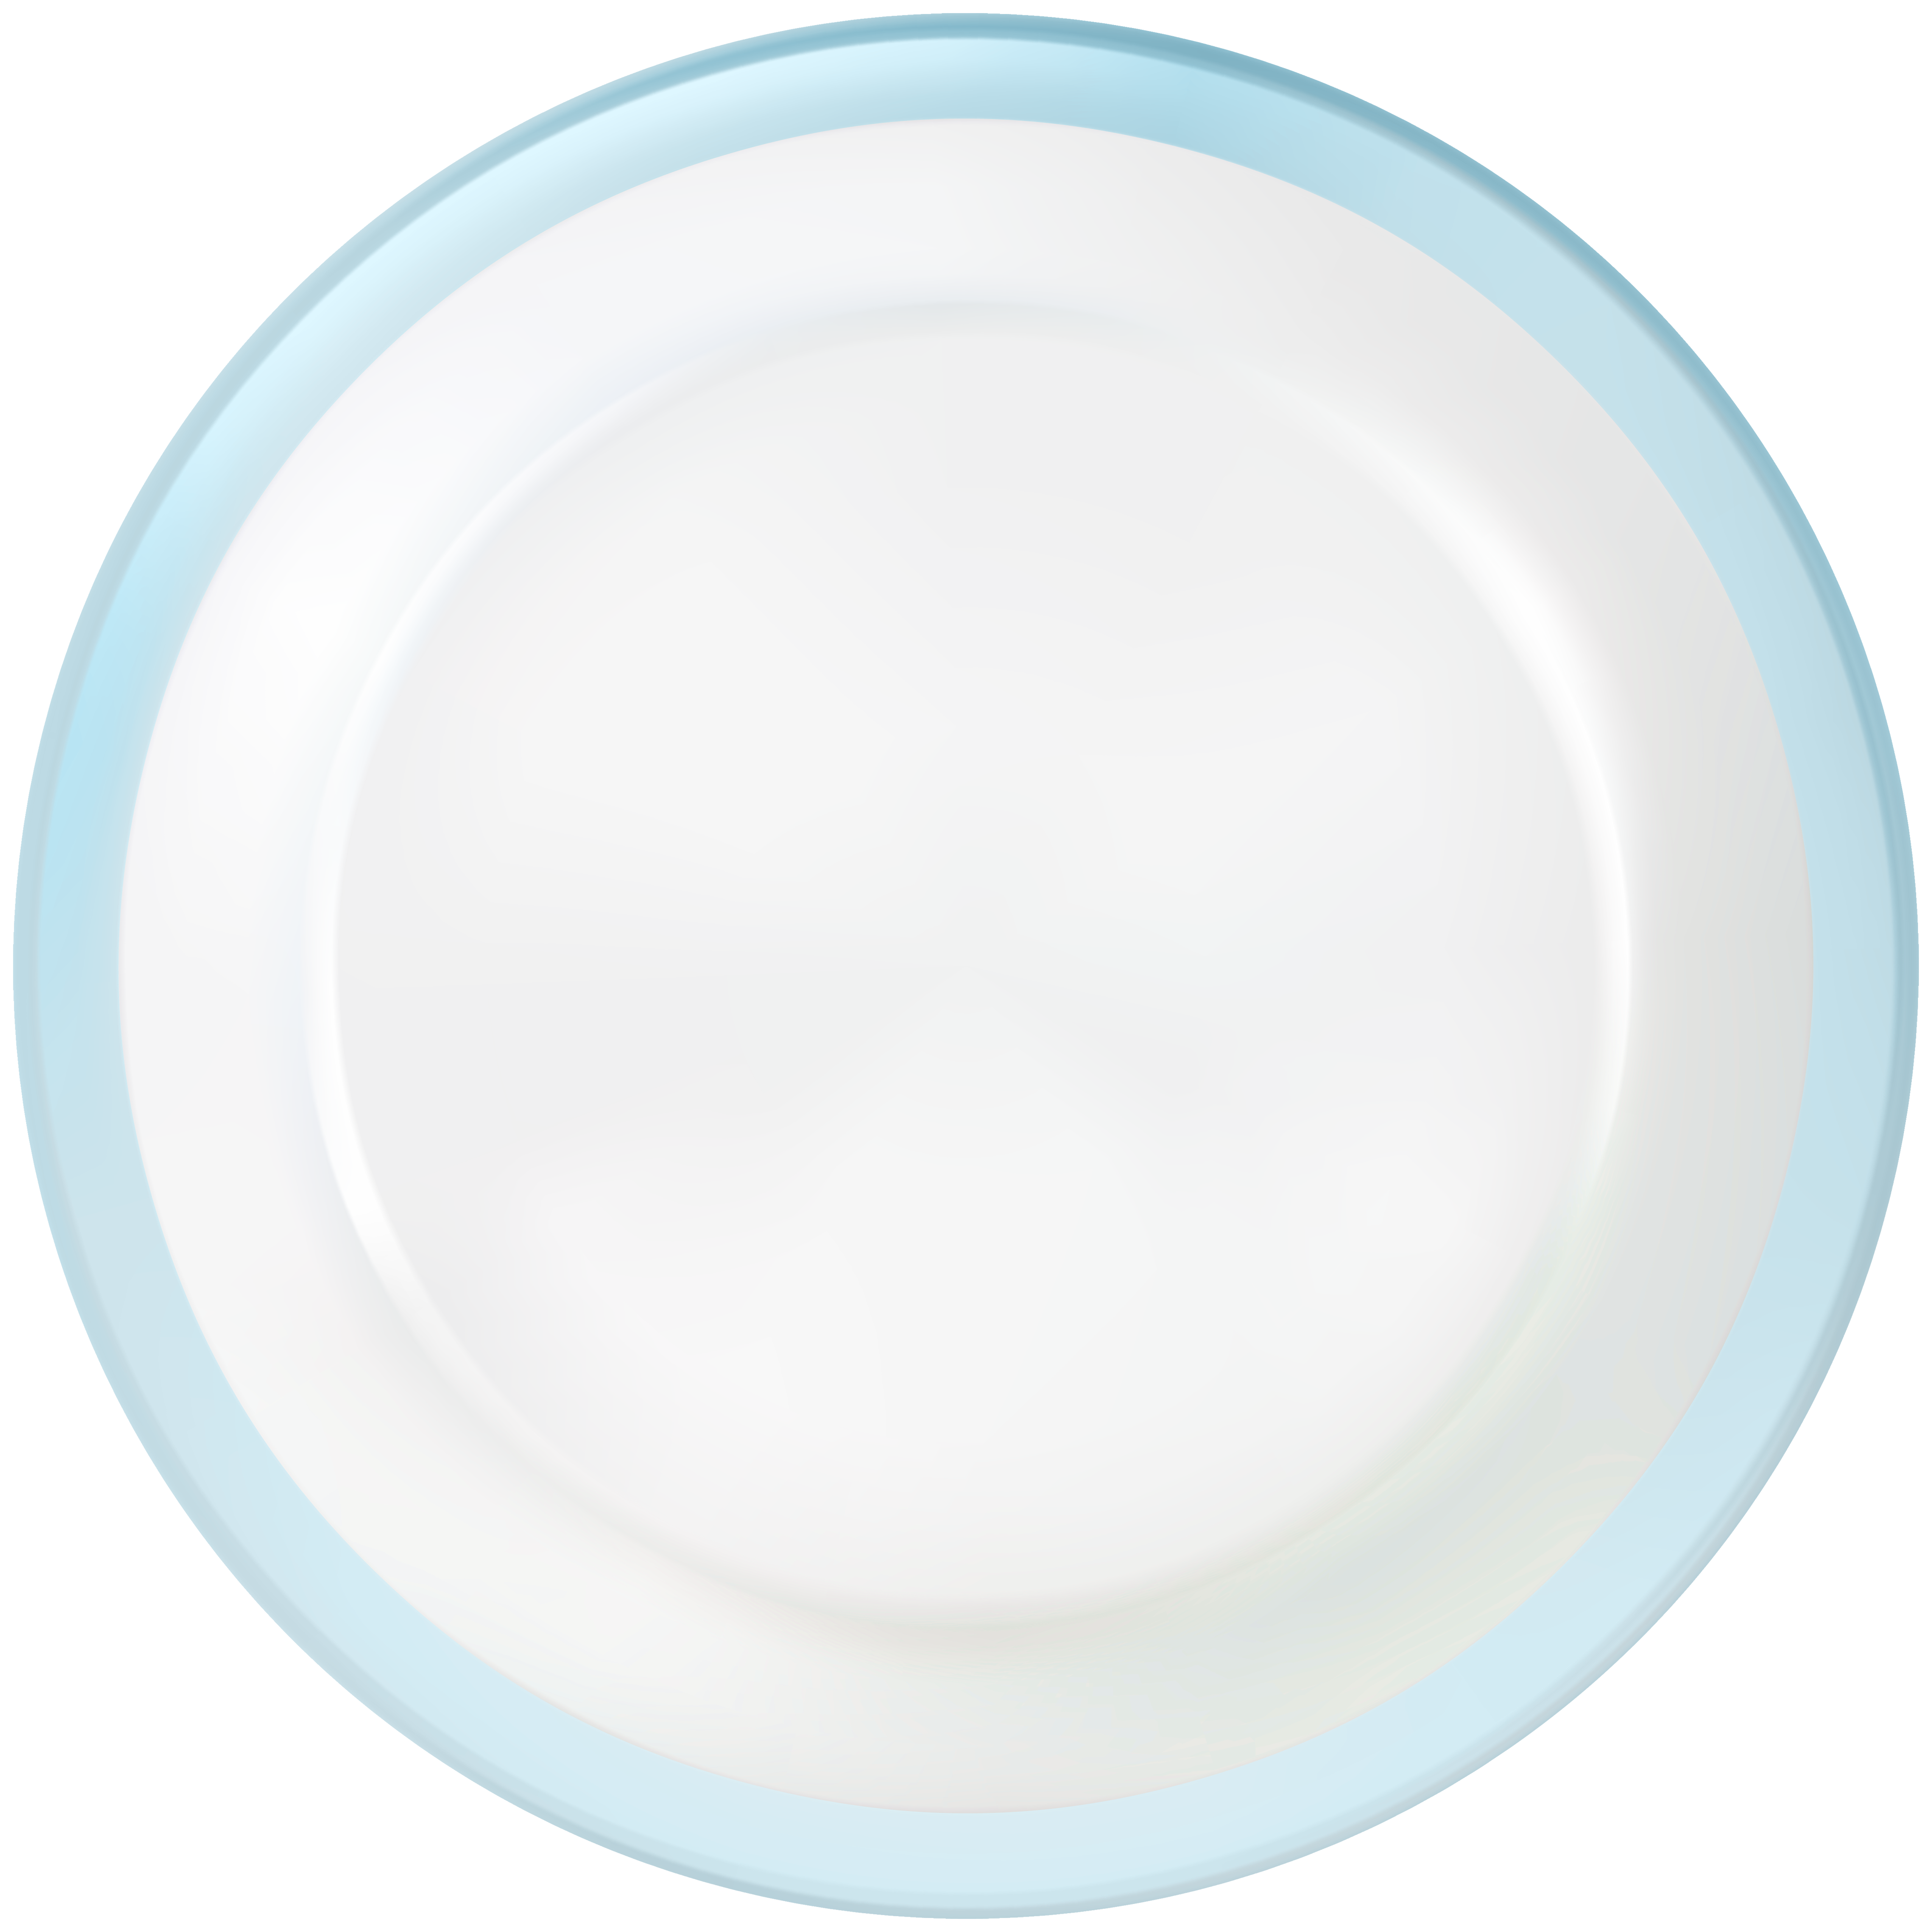 Plate clipart golden plate, Plate golden plate Transparent FREE for